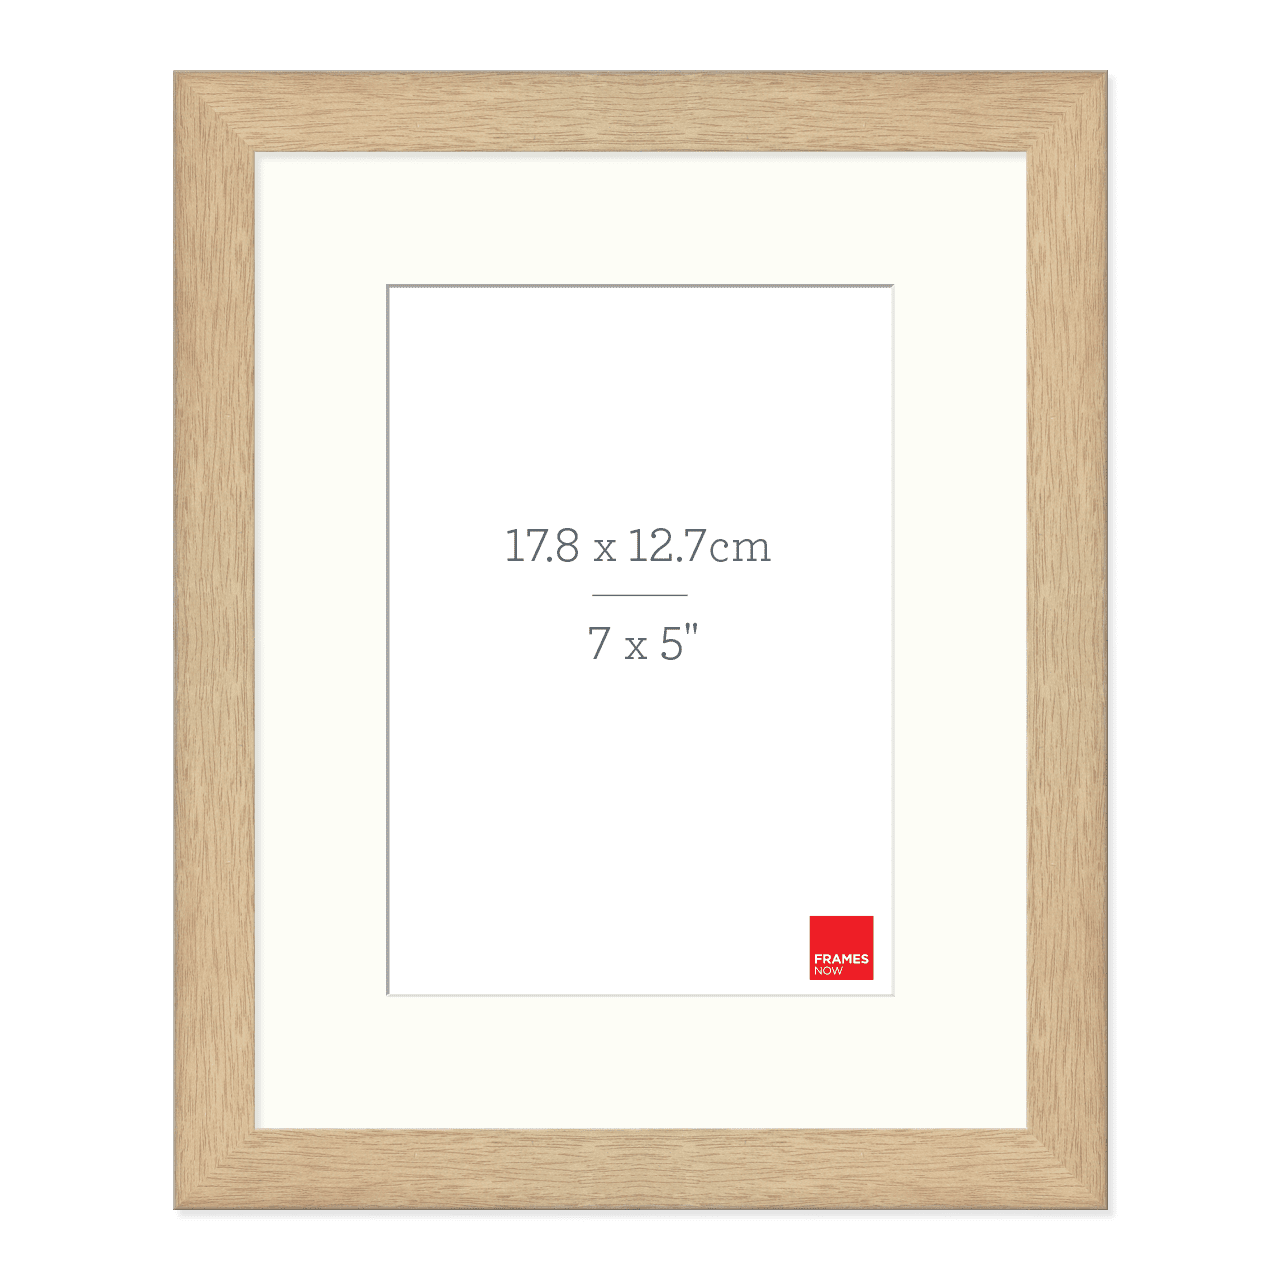 Premium Natural Oak Picture Frame with Matboard for 17.8 x 12.7cm Artwork